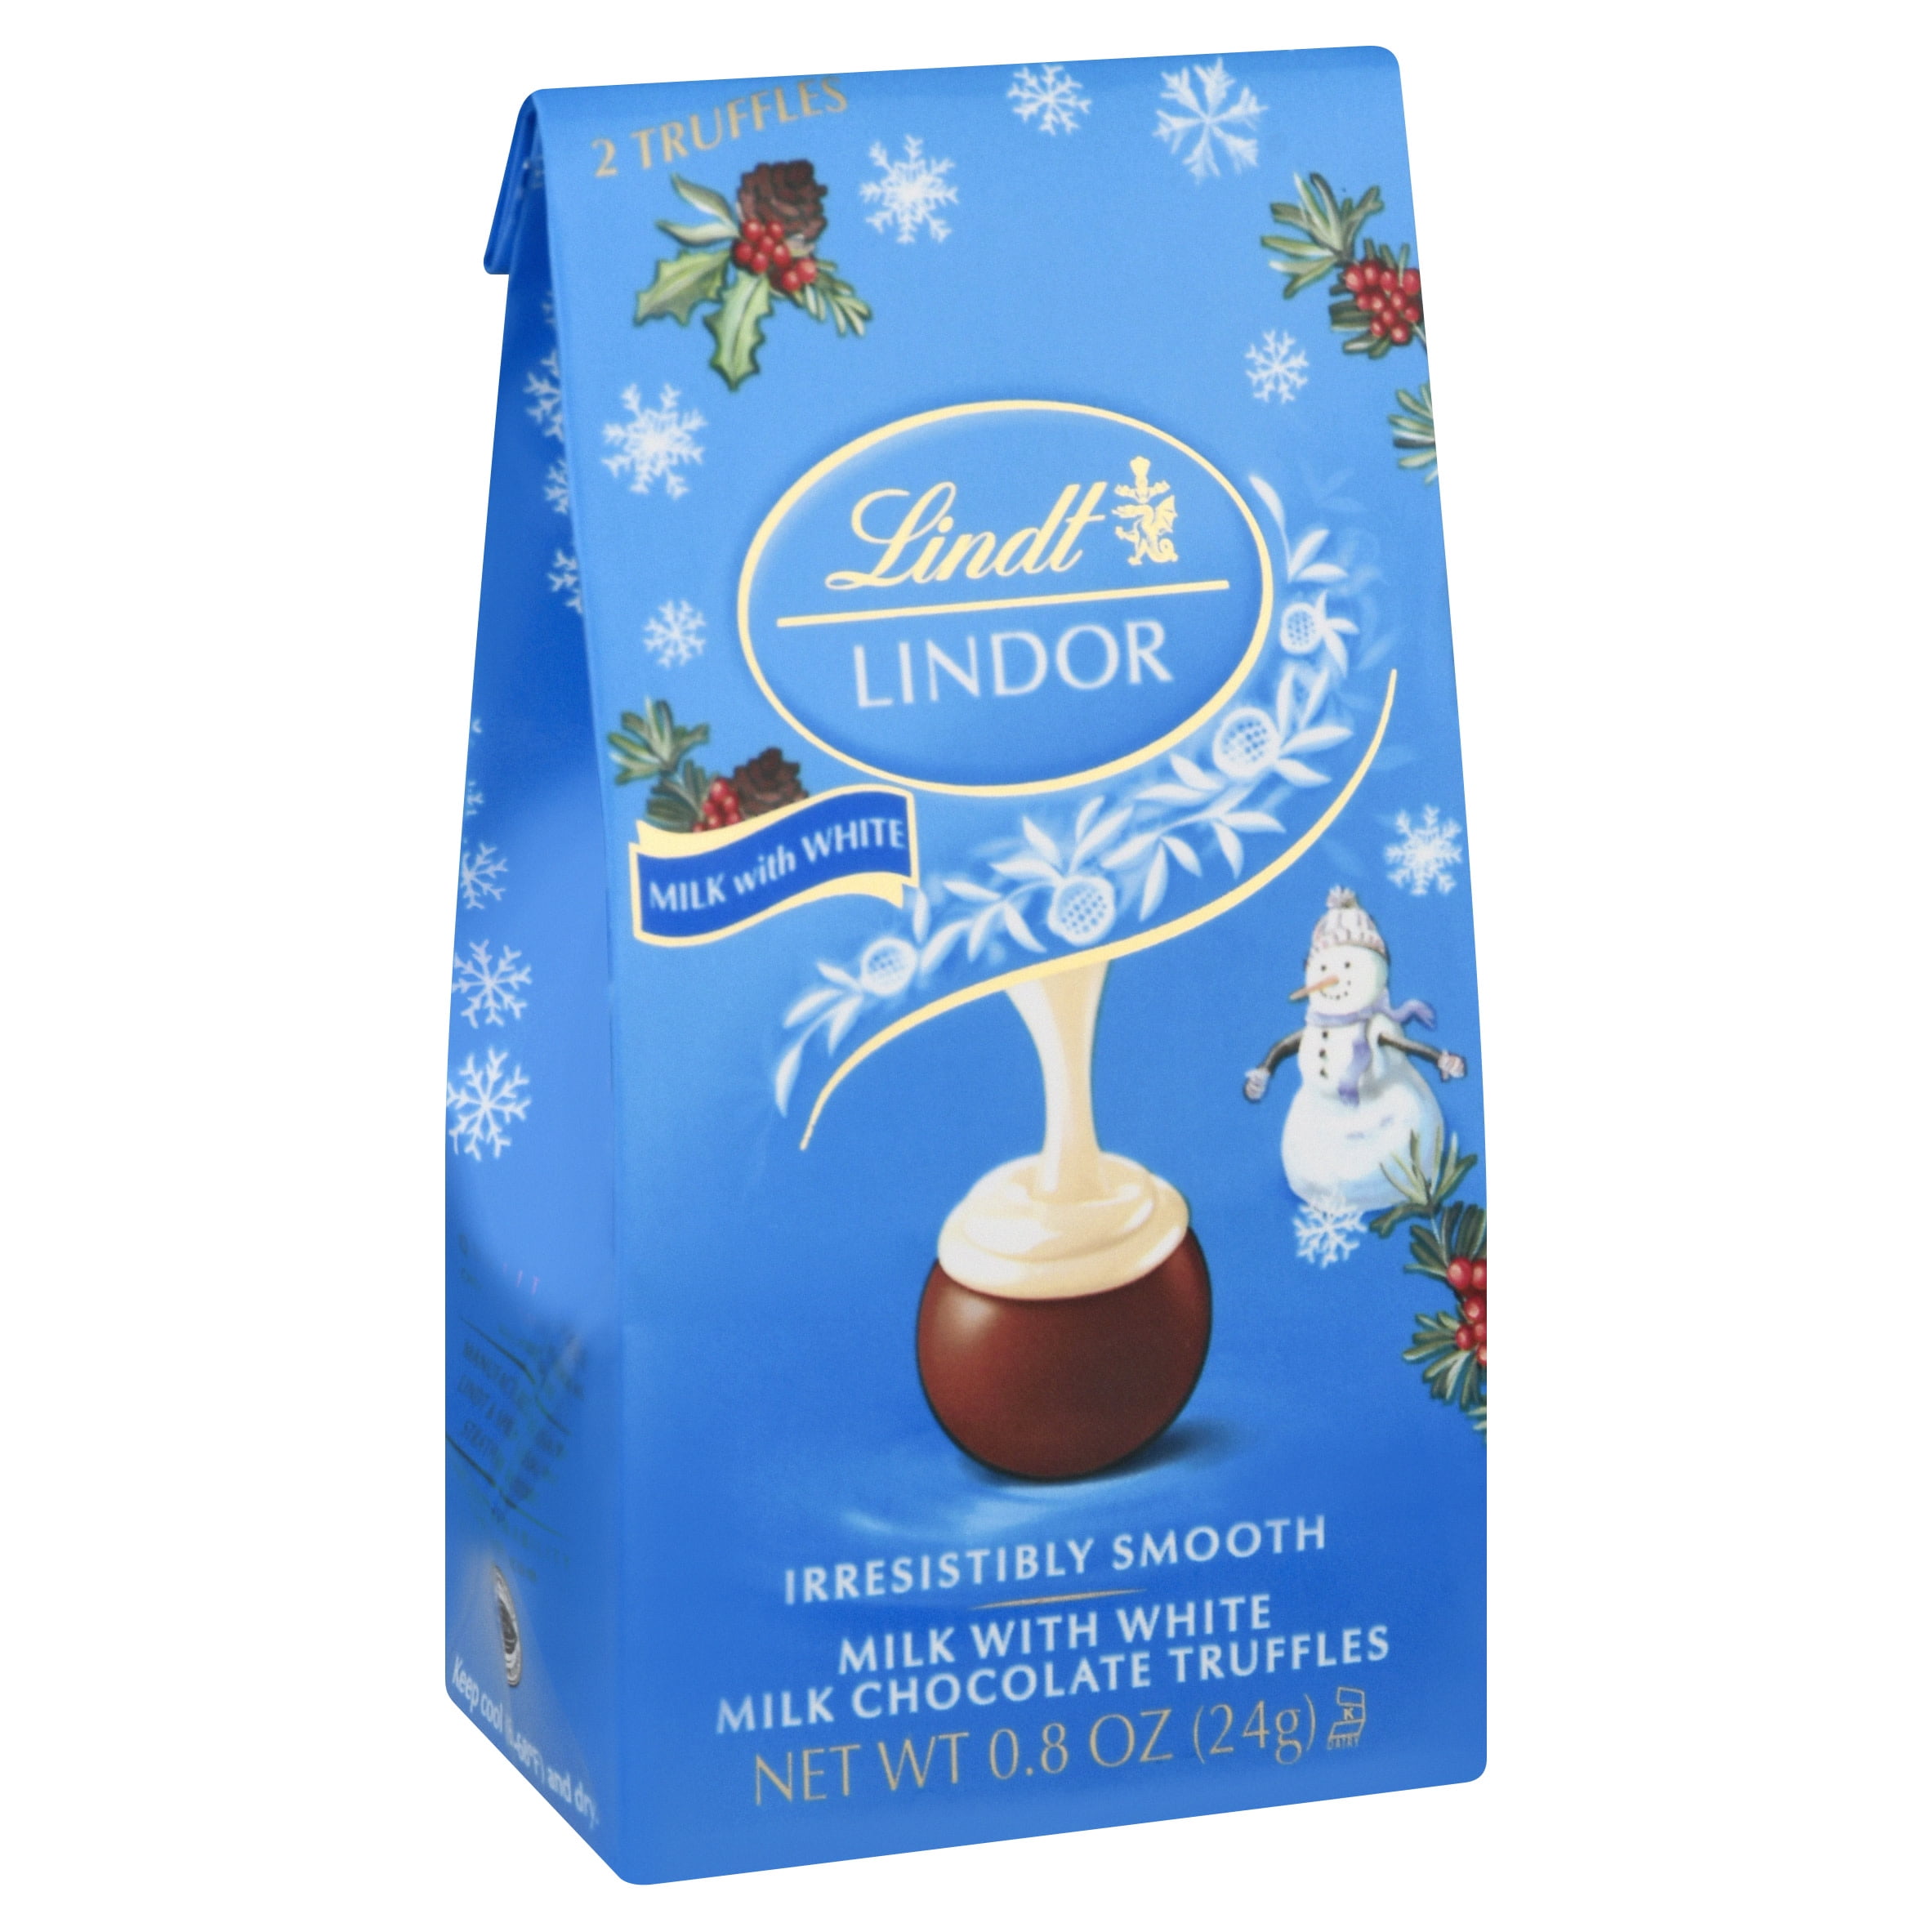 Lindt LINDOR Holiday Snowman Milk and White Snowman Chocolate Candy Truffles, 0.8 oz. Bag